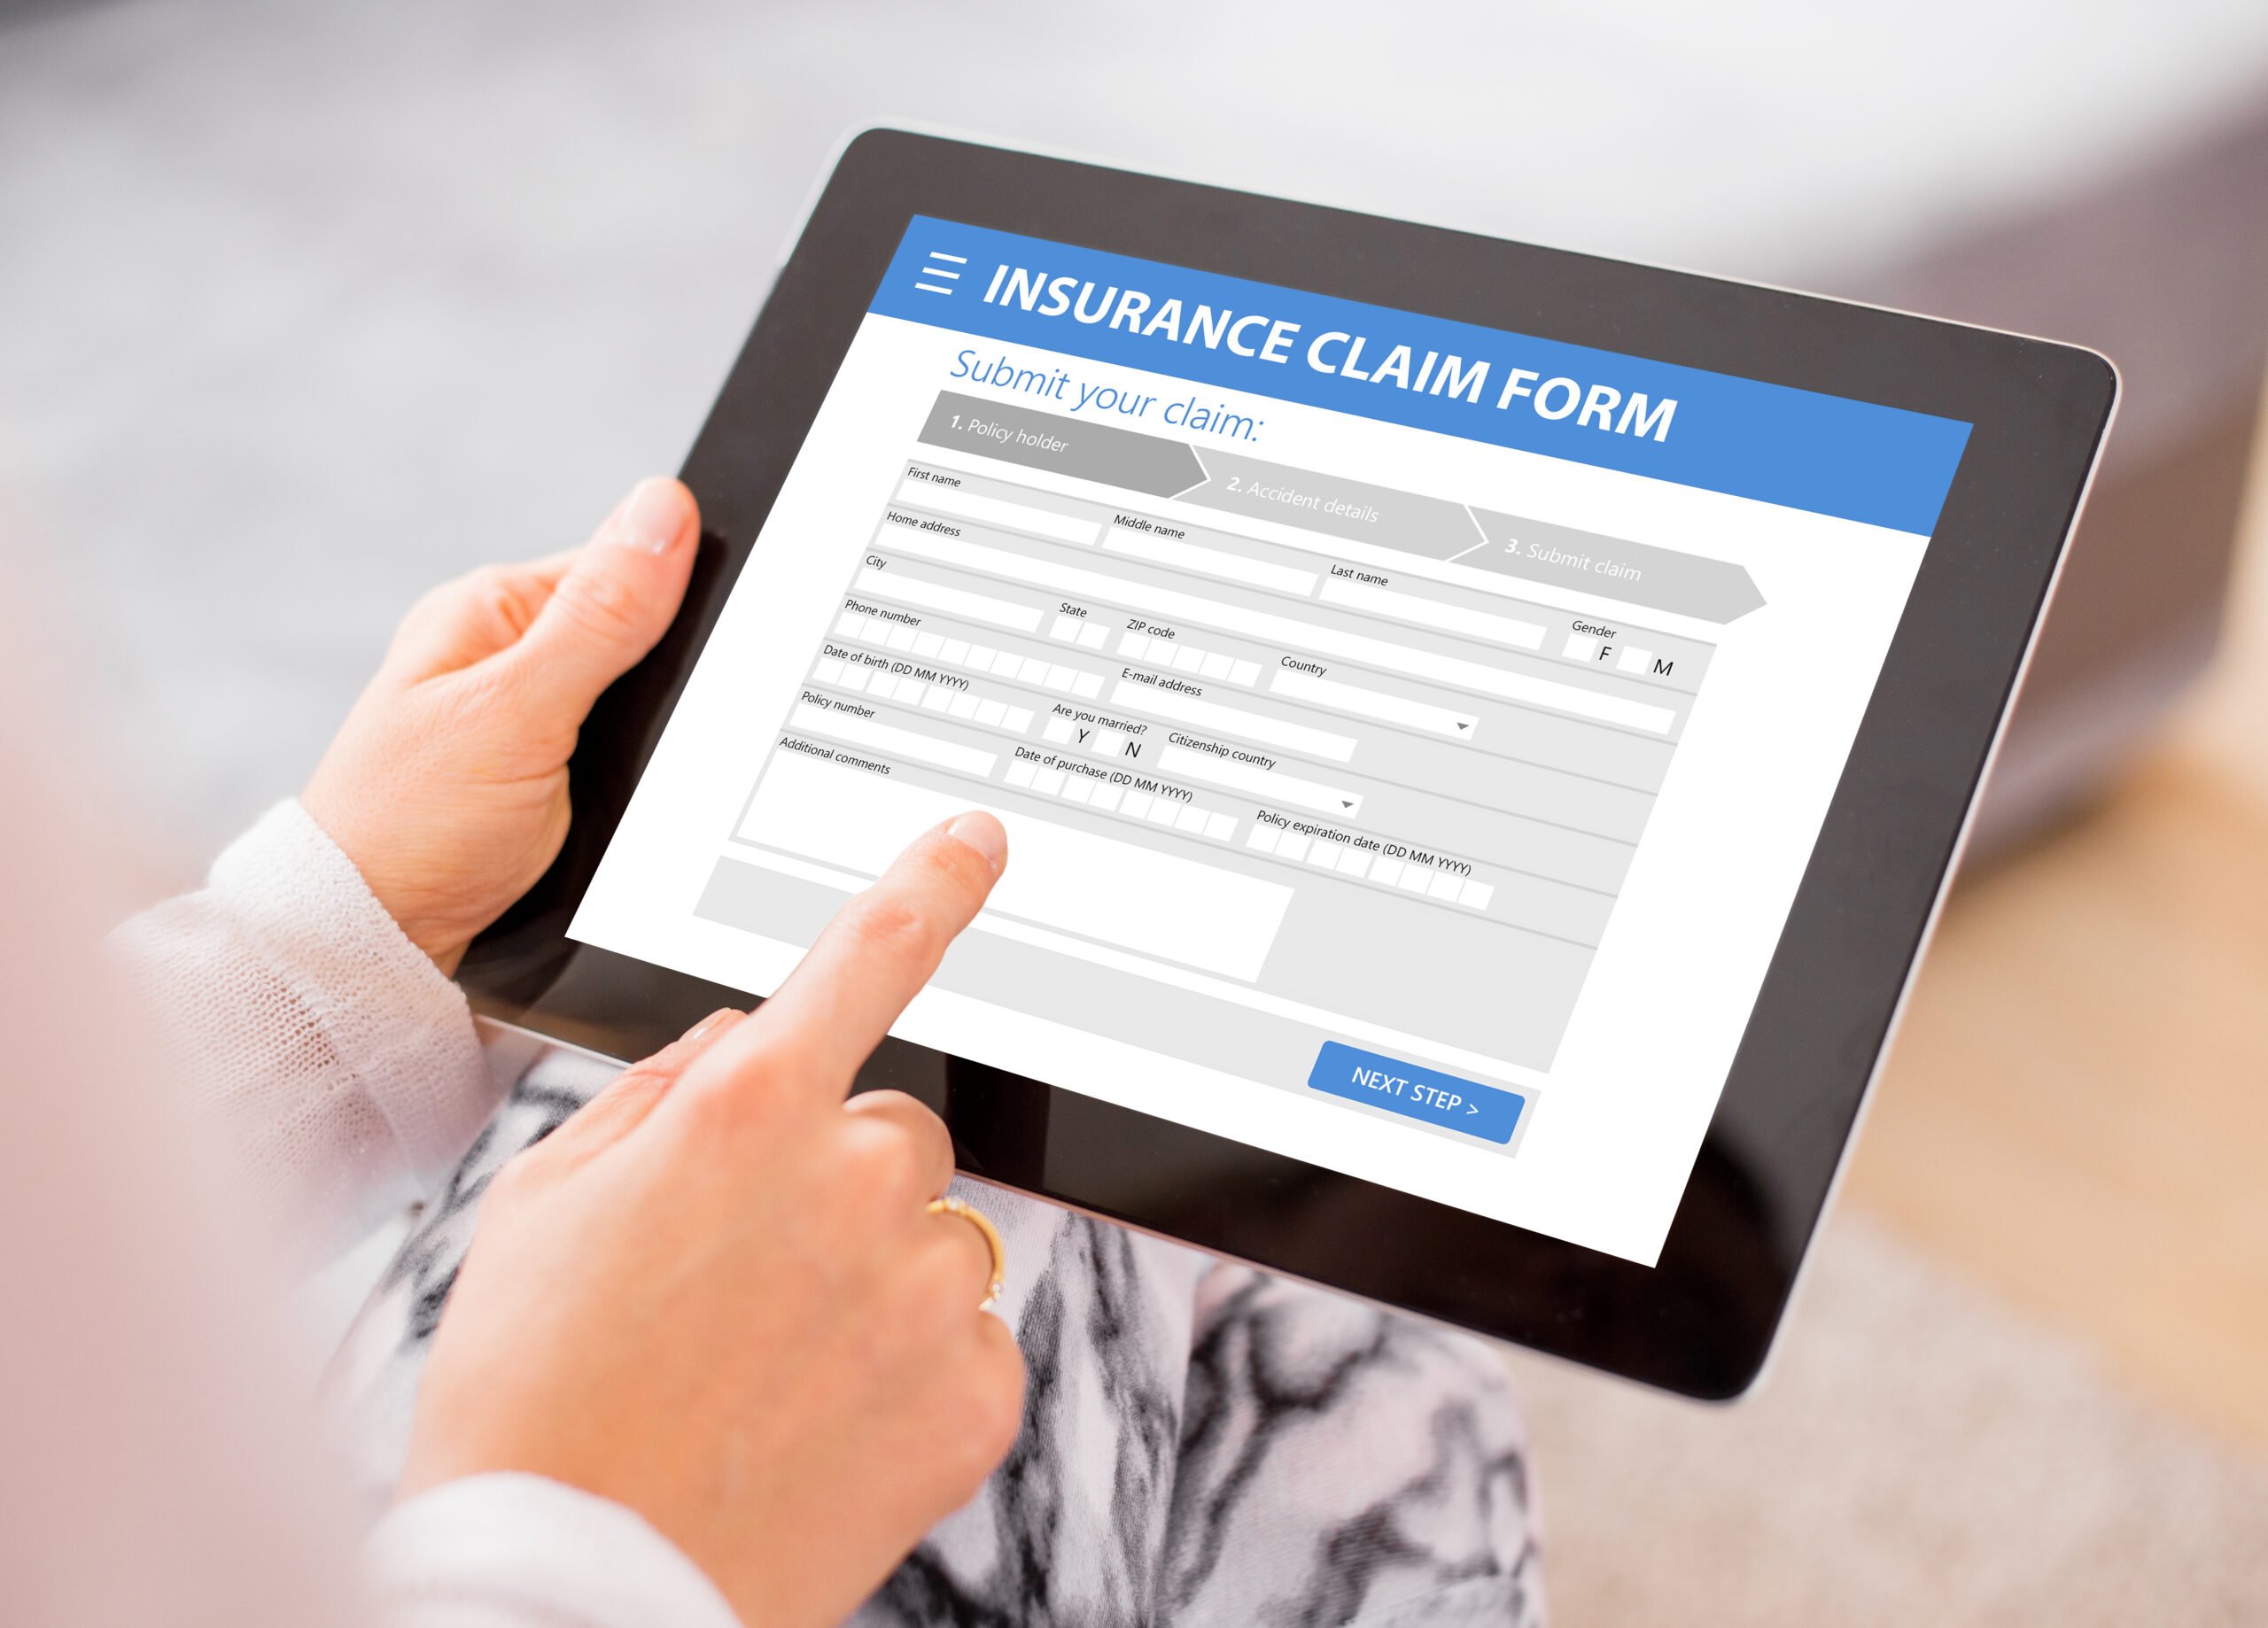 auto insurance fraud - image of a person filling out an auto insurance claim on an ipad